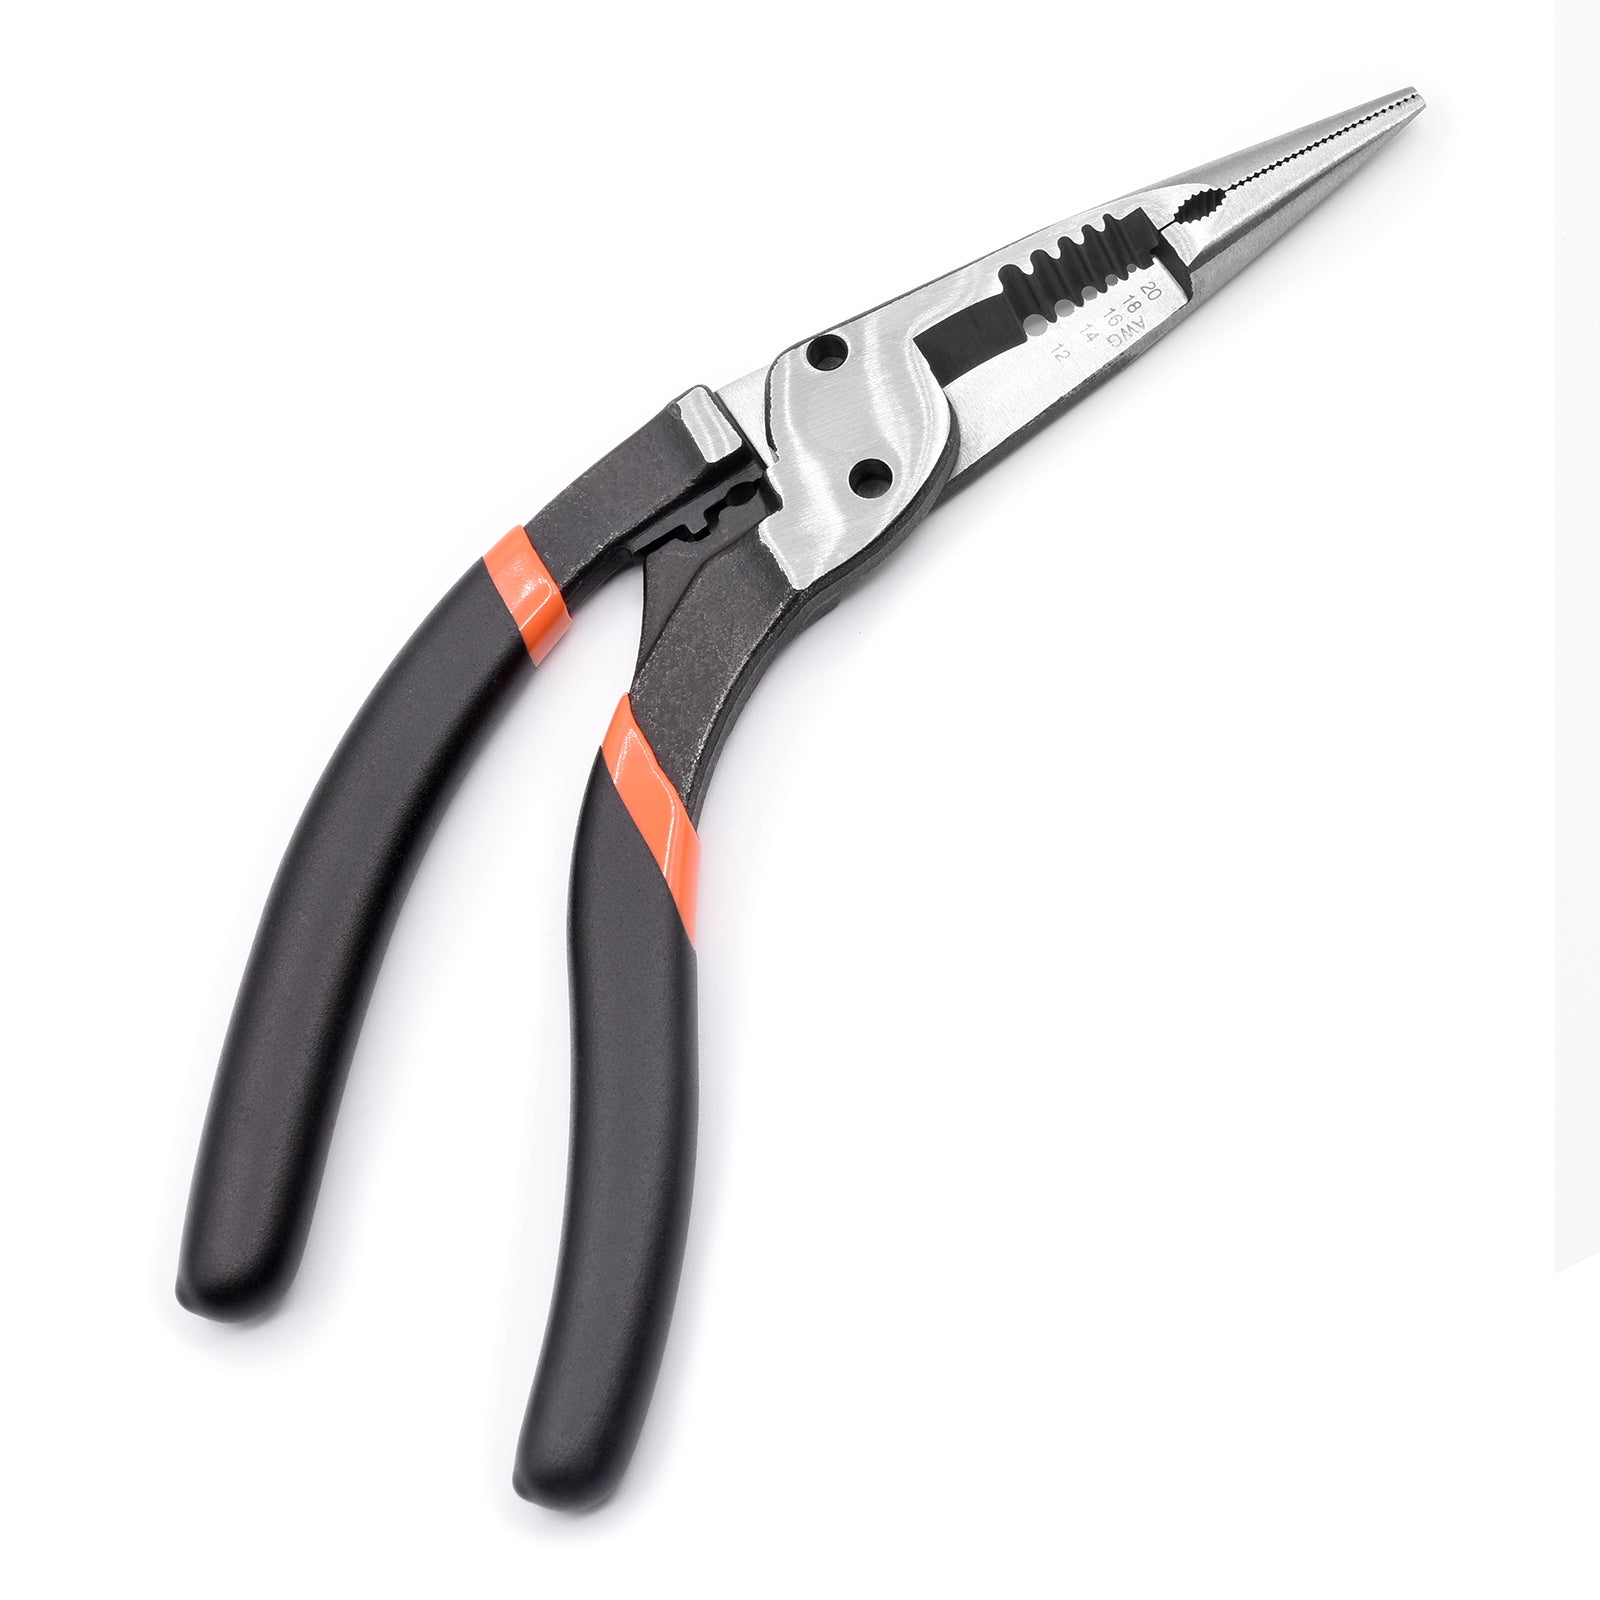 Fujiya Electrician's Plier with Ergonomic Curved Handles